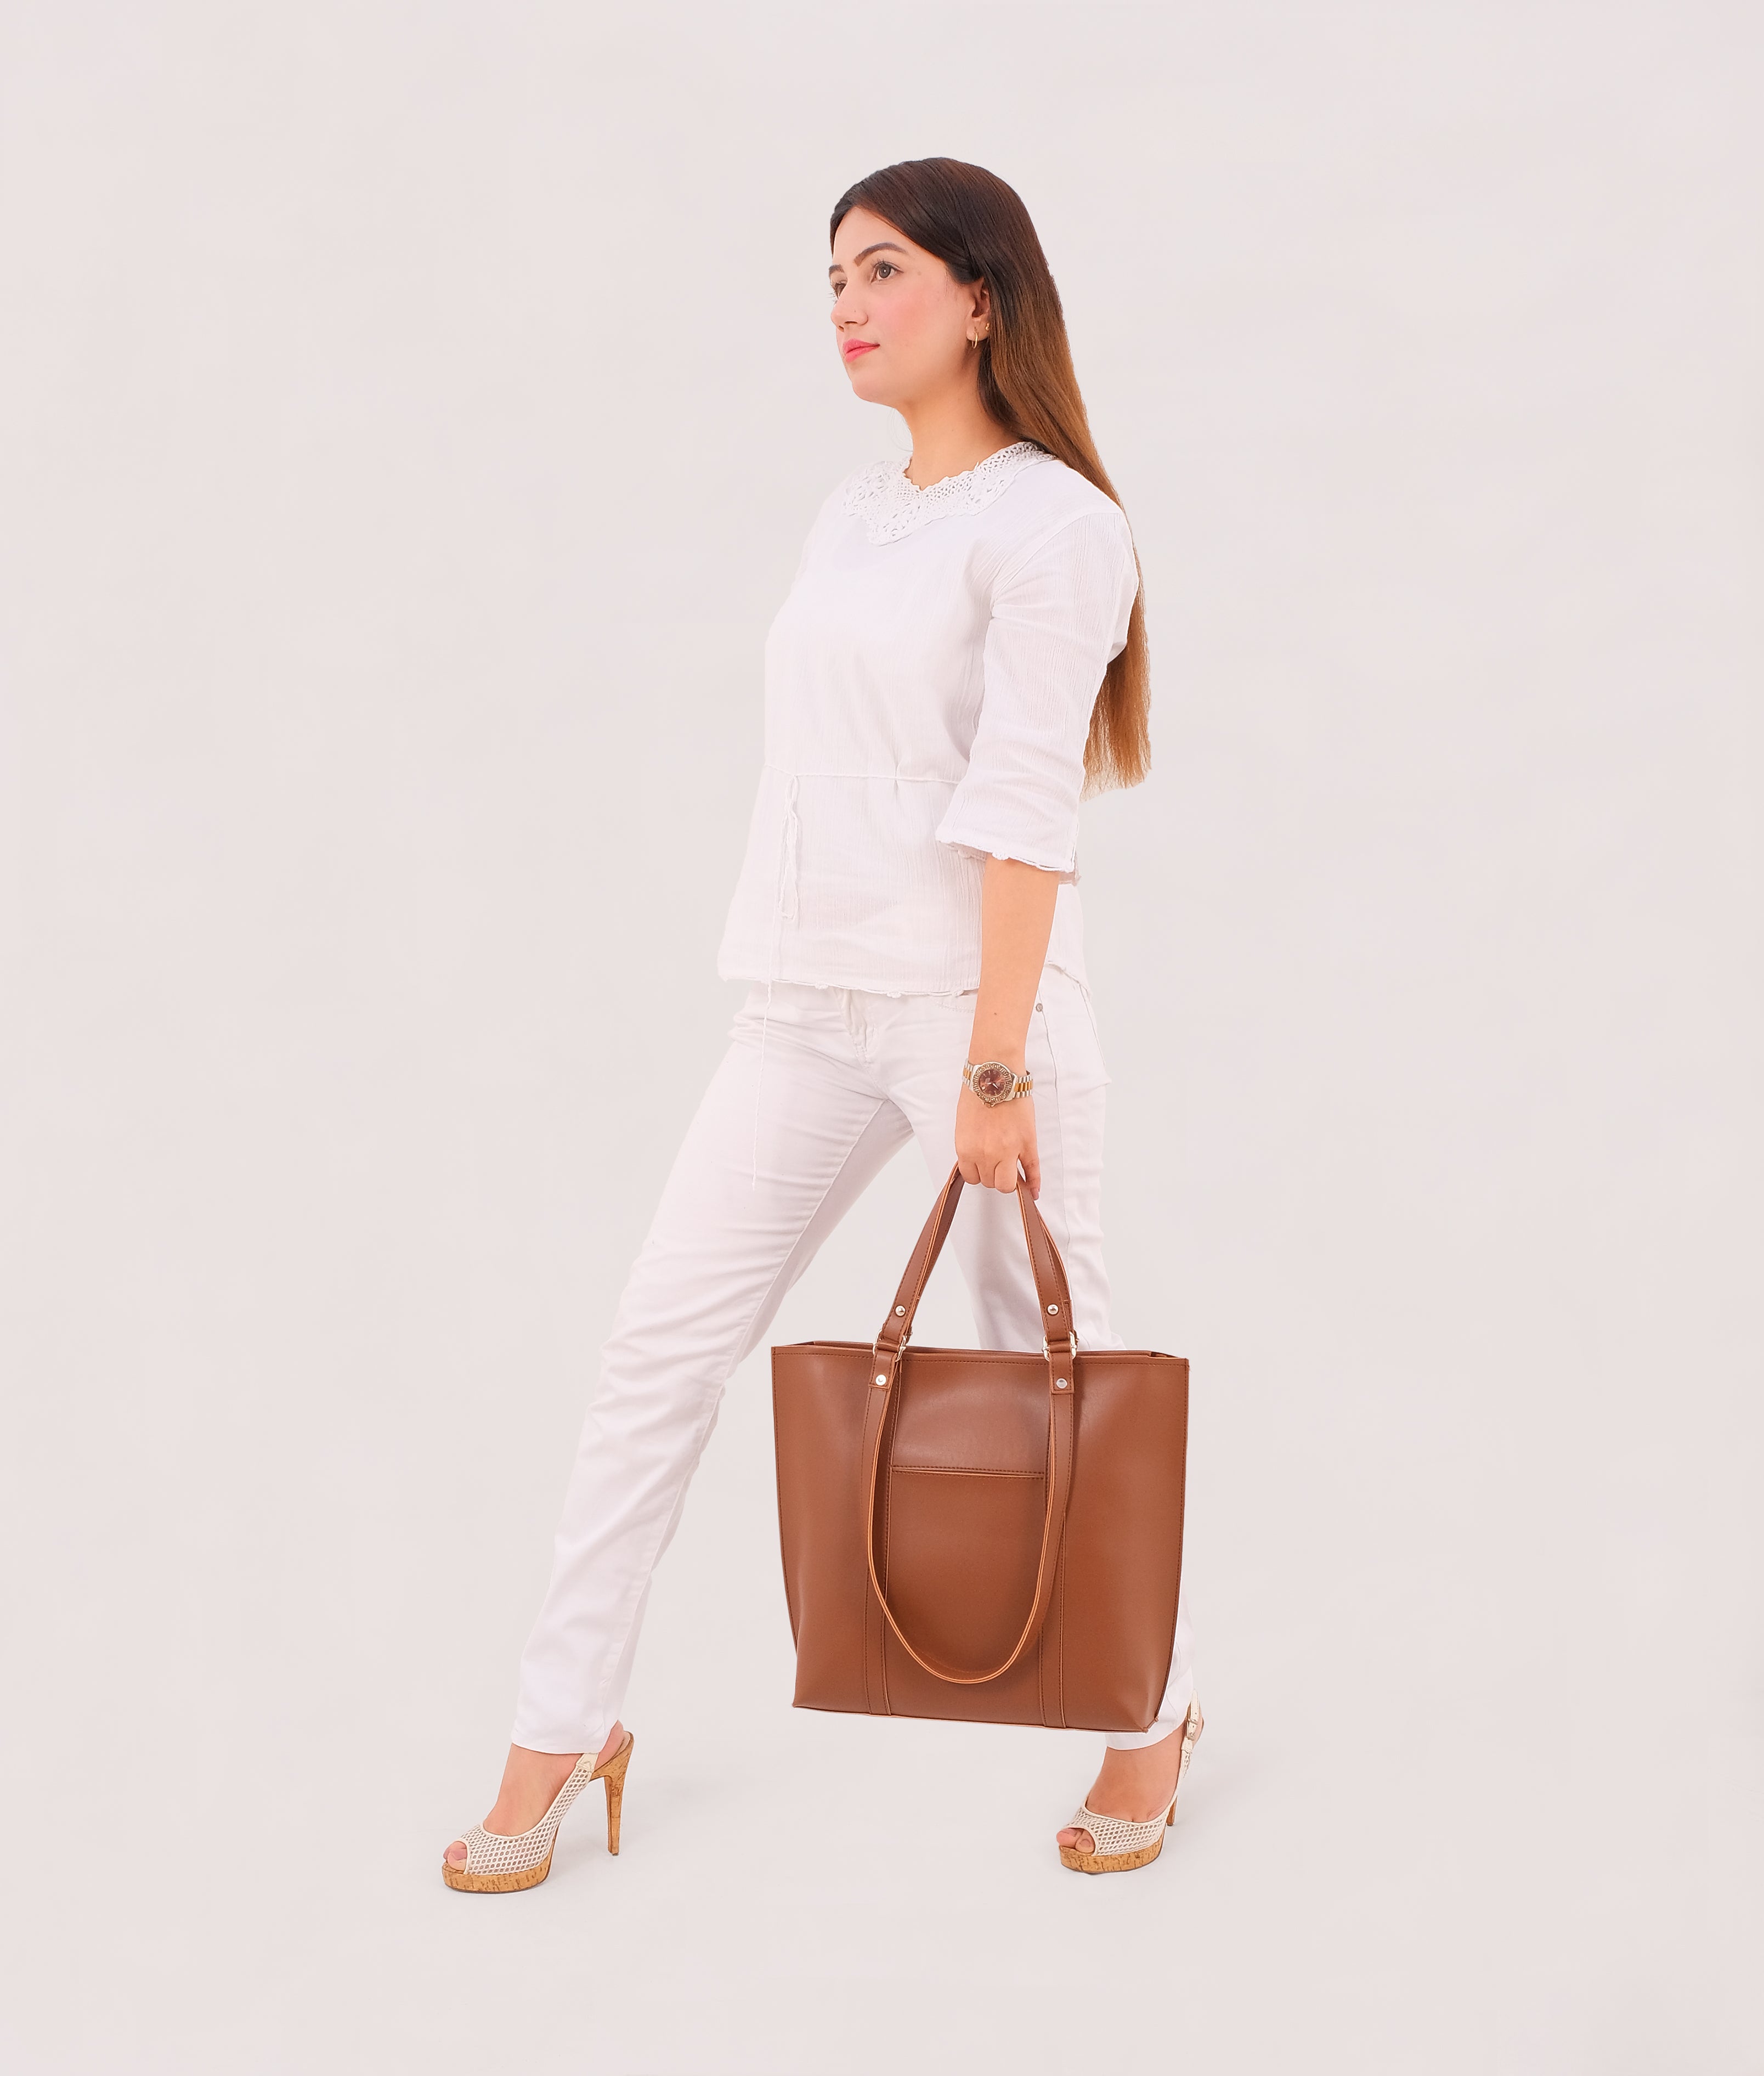 Brown double-handle tote bag